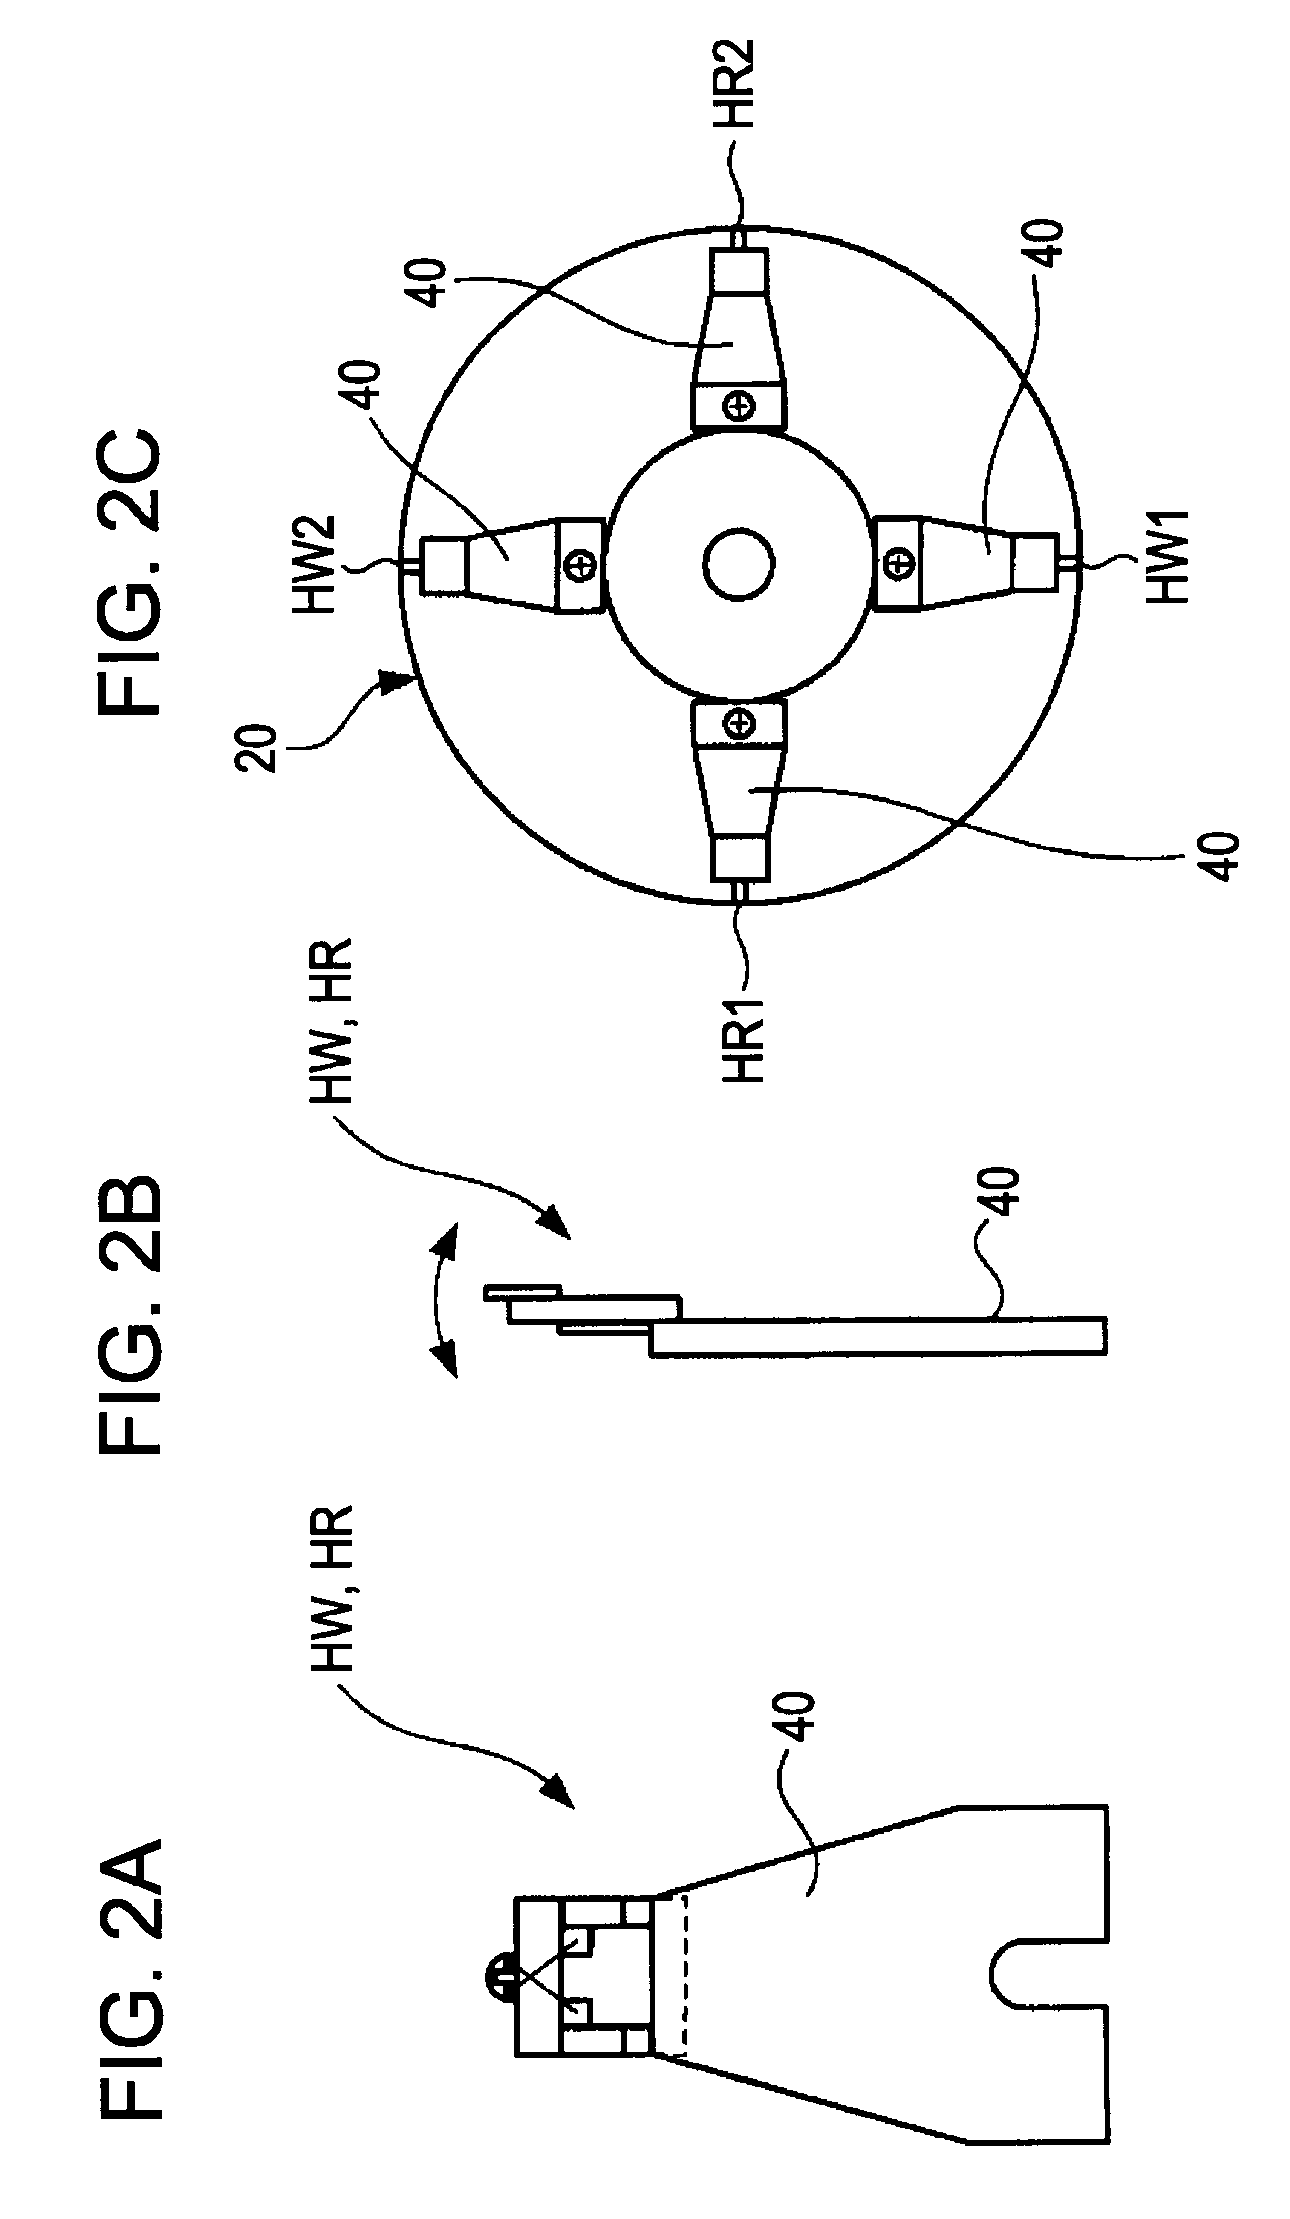 Helical-scan-type magnetic tape recording and reproducing apparatus and magnetic tape recording and reproducing method